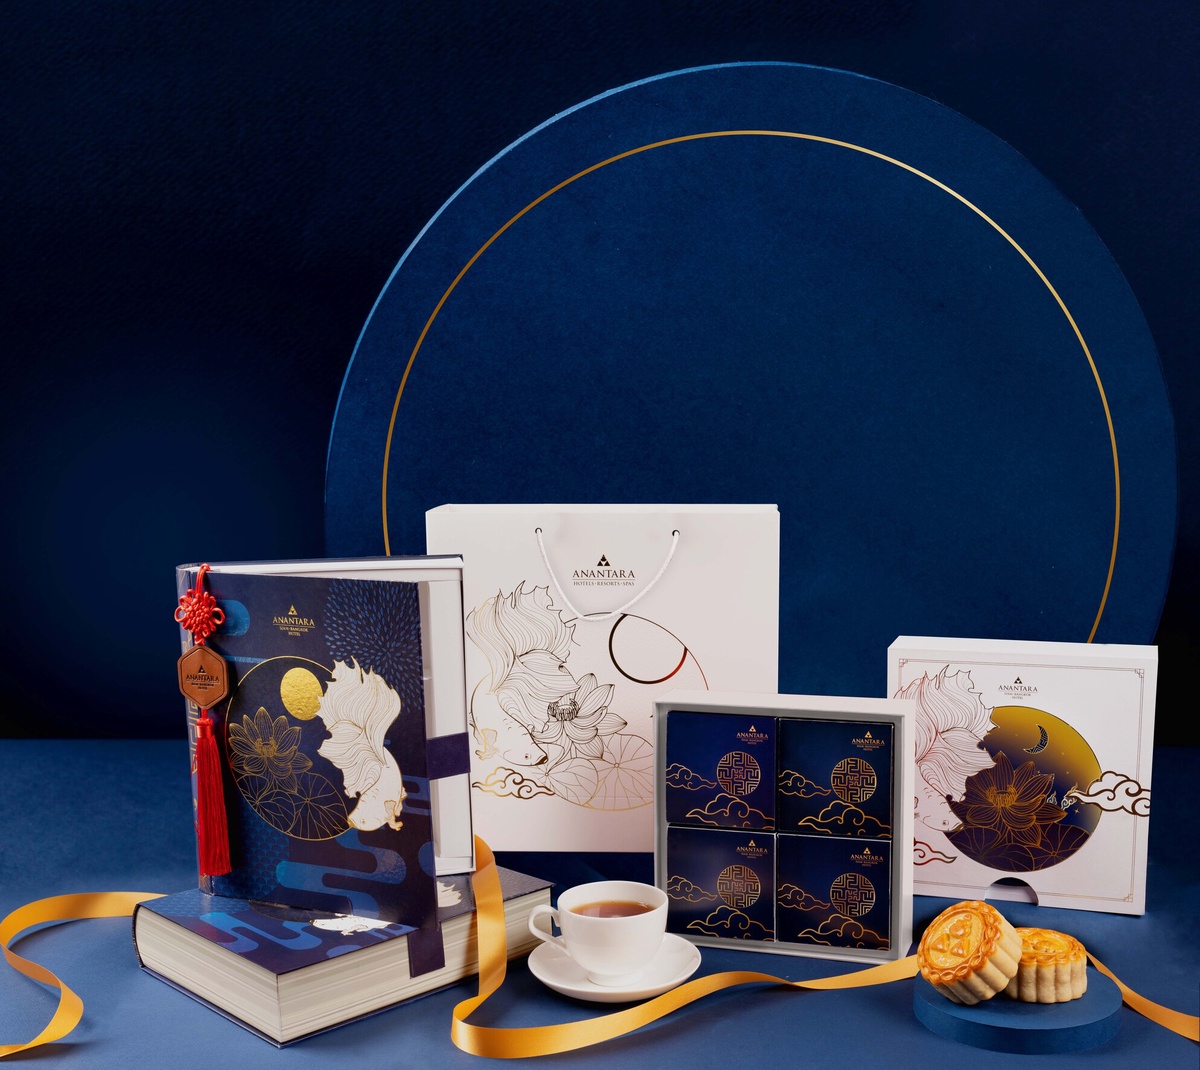 Anantara Siam Bangkok Unveils a Collection of Exquisite Mooncake Gift Sets Inspired by Tradition and Nature